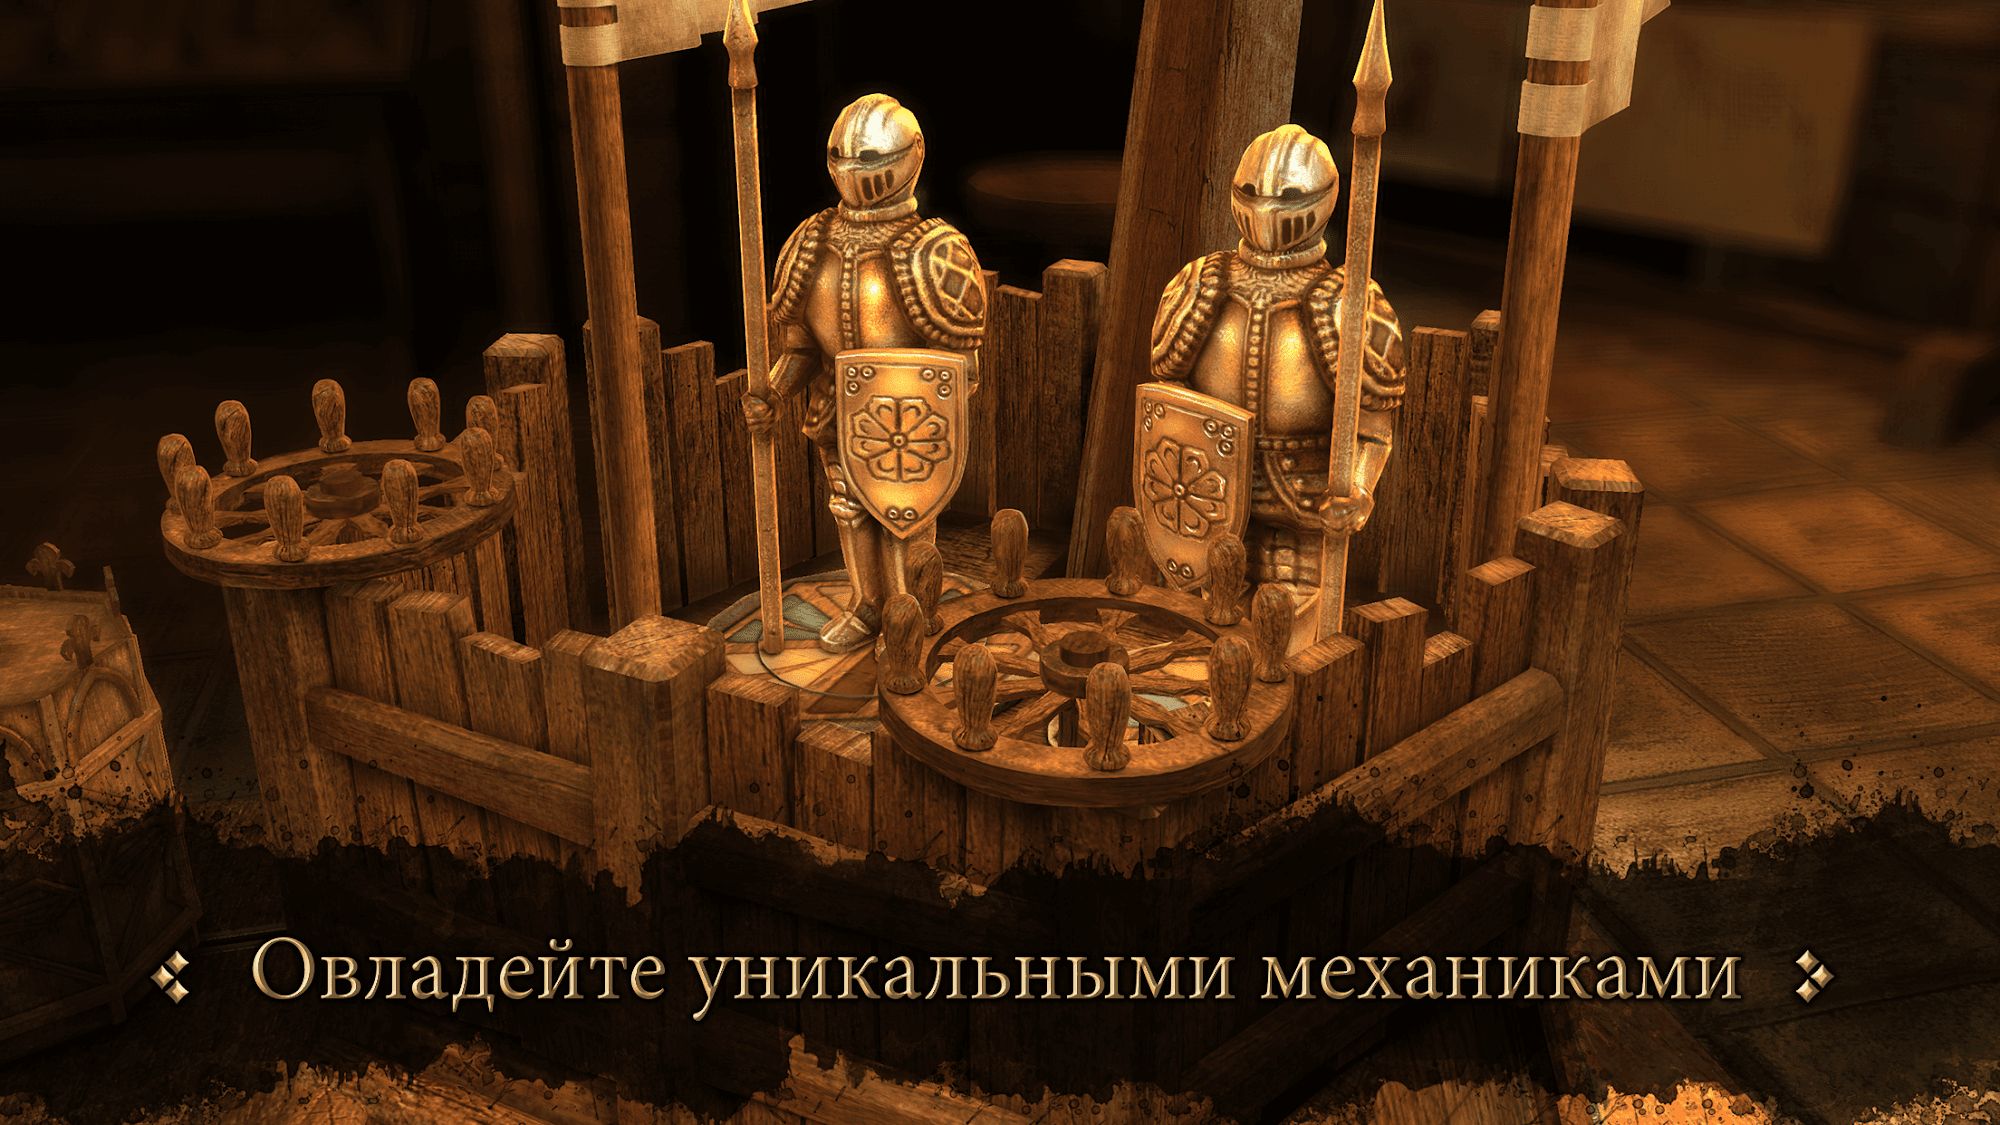 The House of Da Vinci для Android